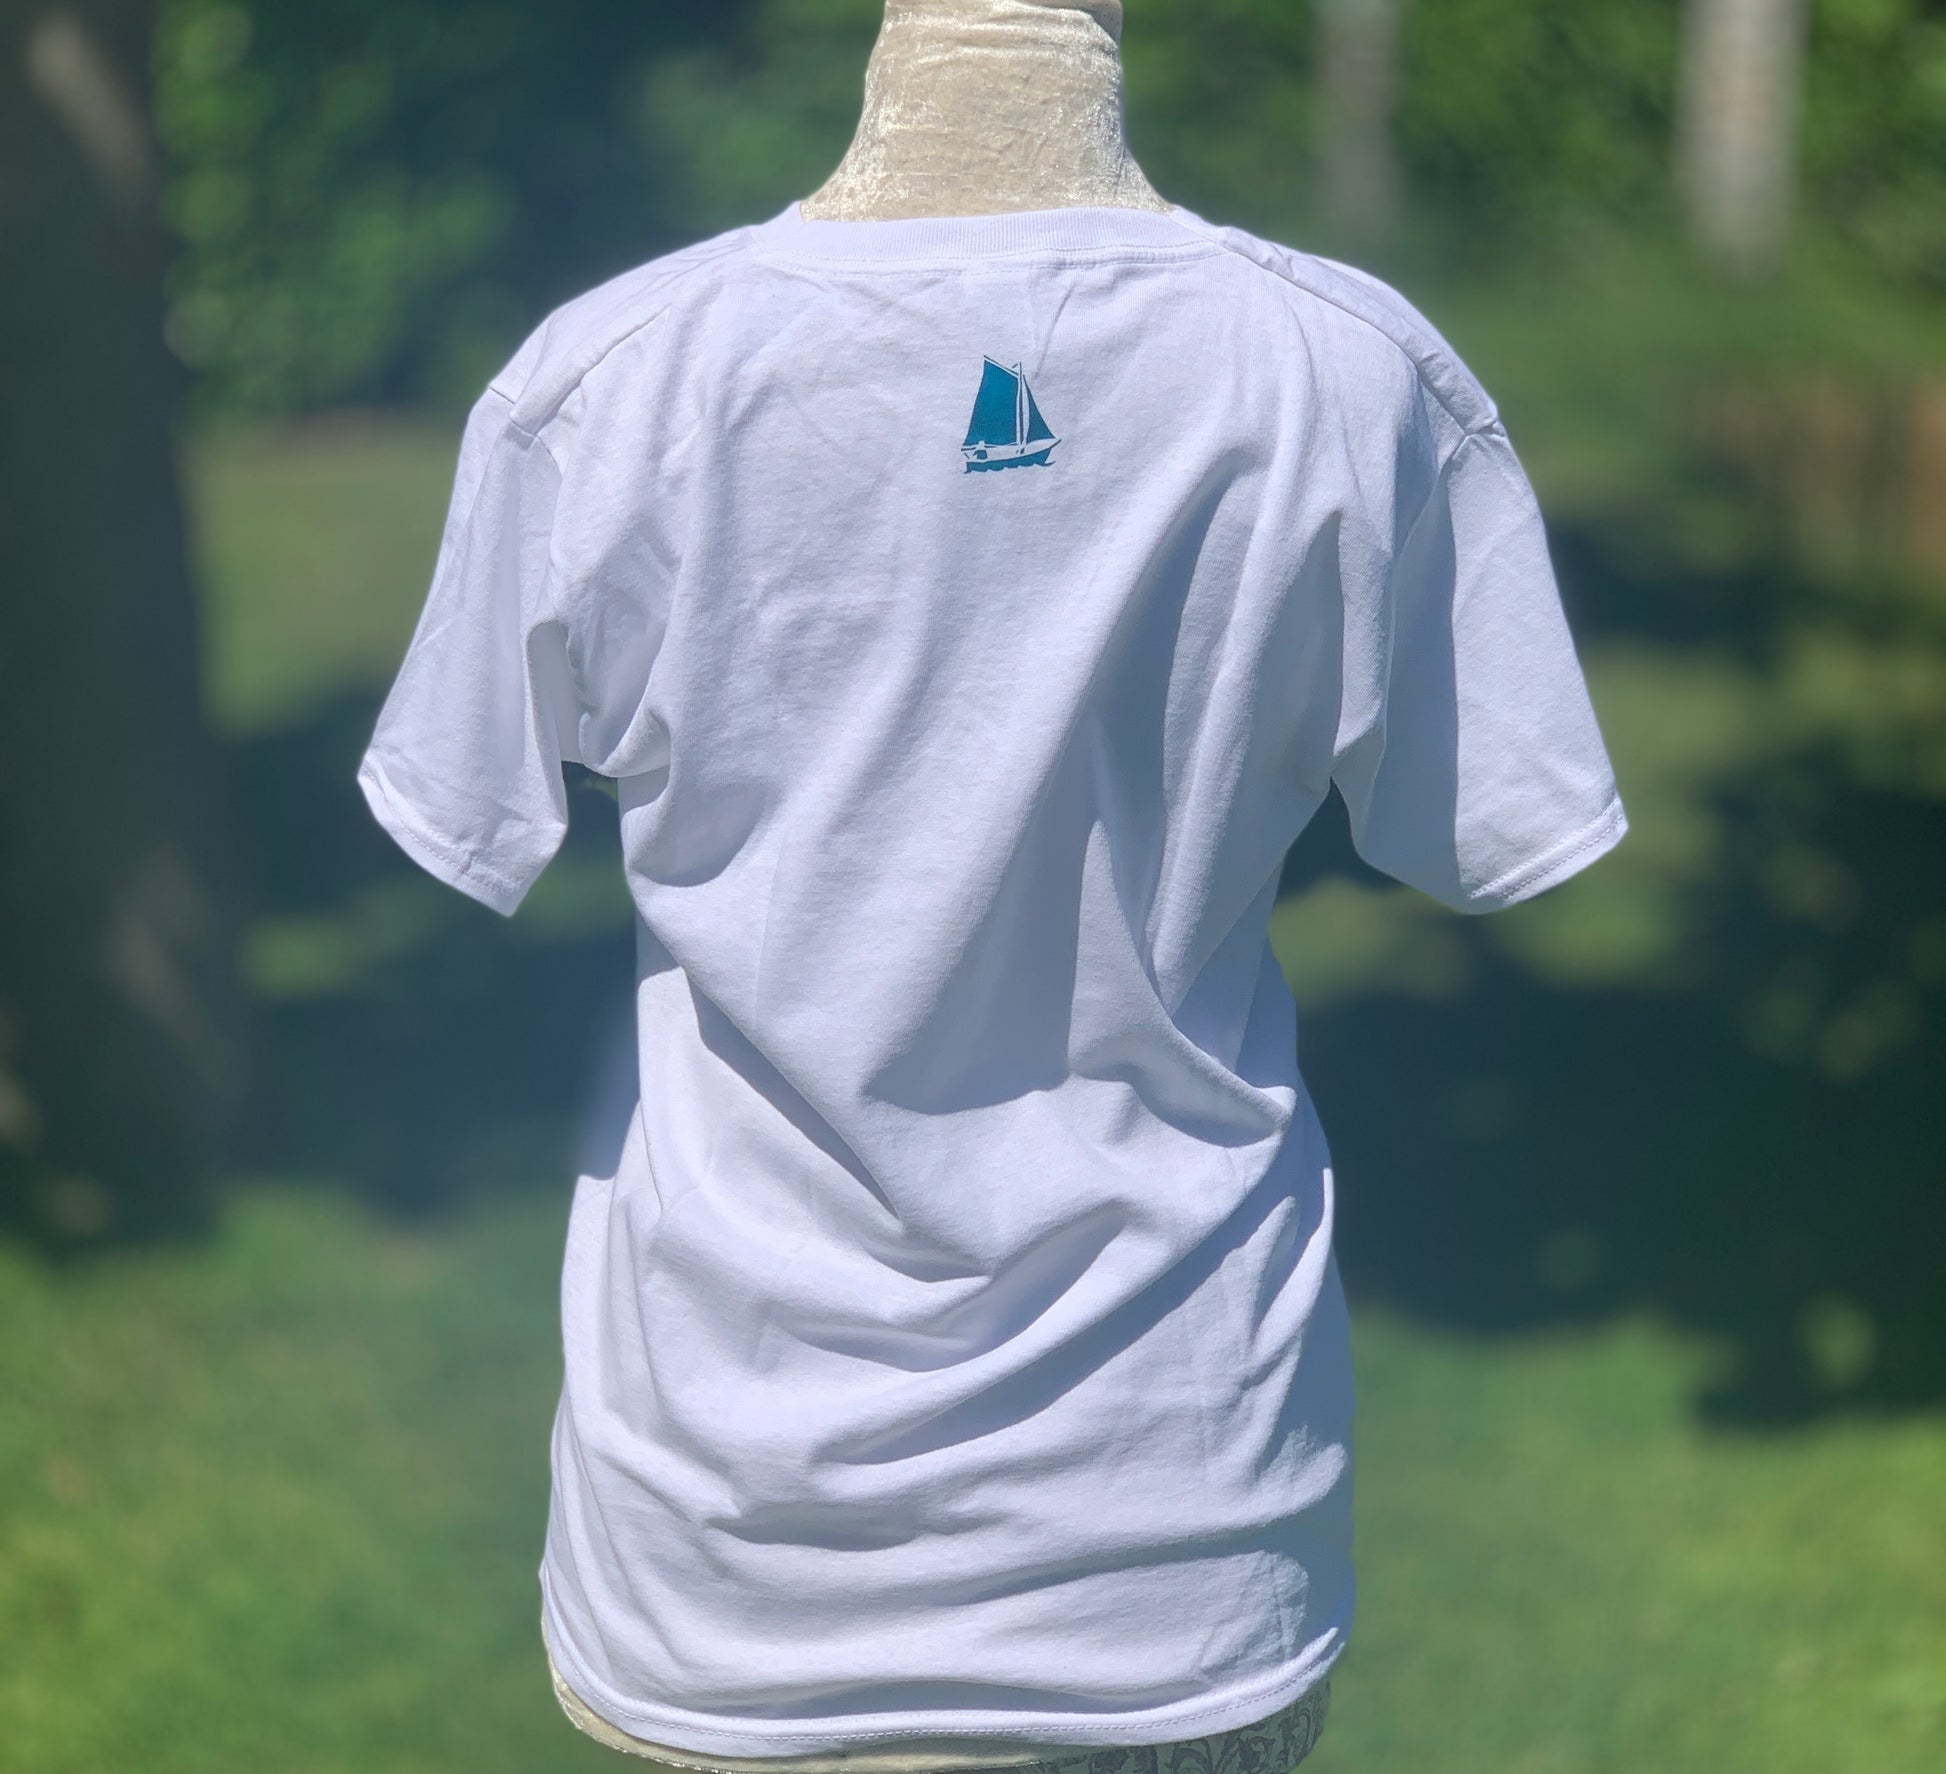 Back of white T-shirt with turquoise blue design of boat at neck line.